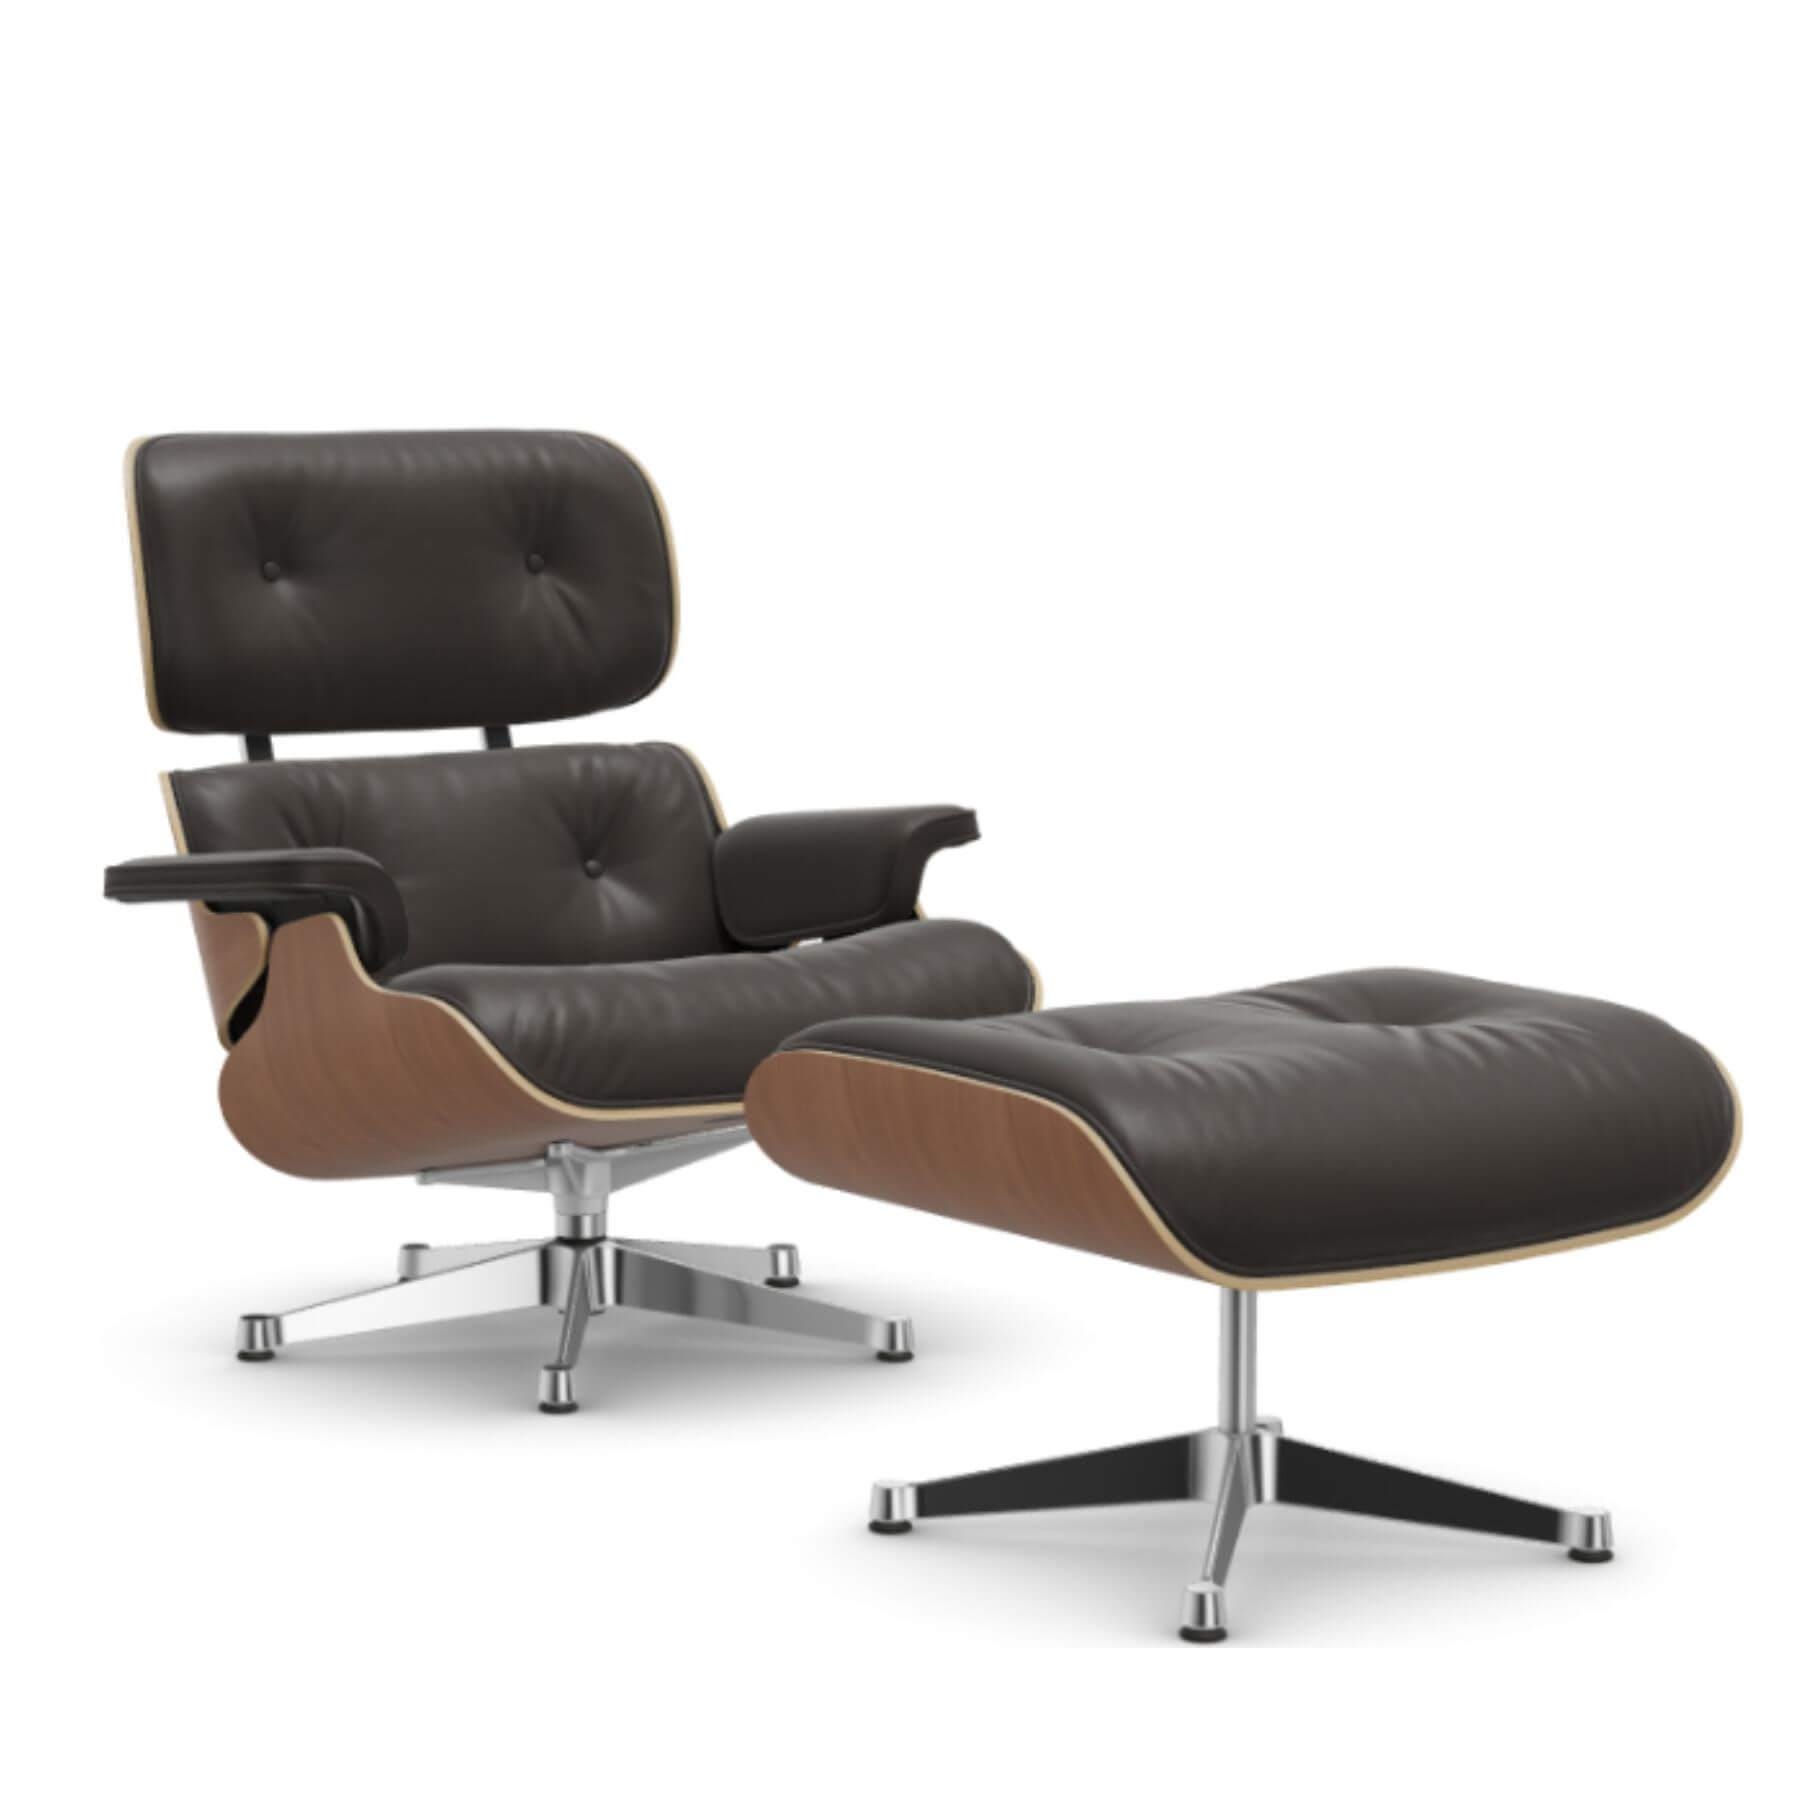 Vitra Eames Classic Lounge Chair American Cherry Leather Natural F Chocolate Polished Aluminium With Ottoman Light Wood Designer Furniture From Ho